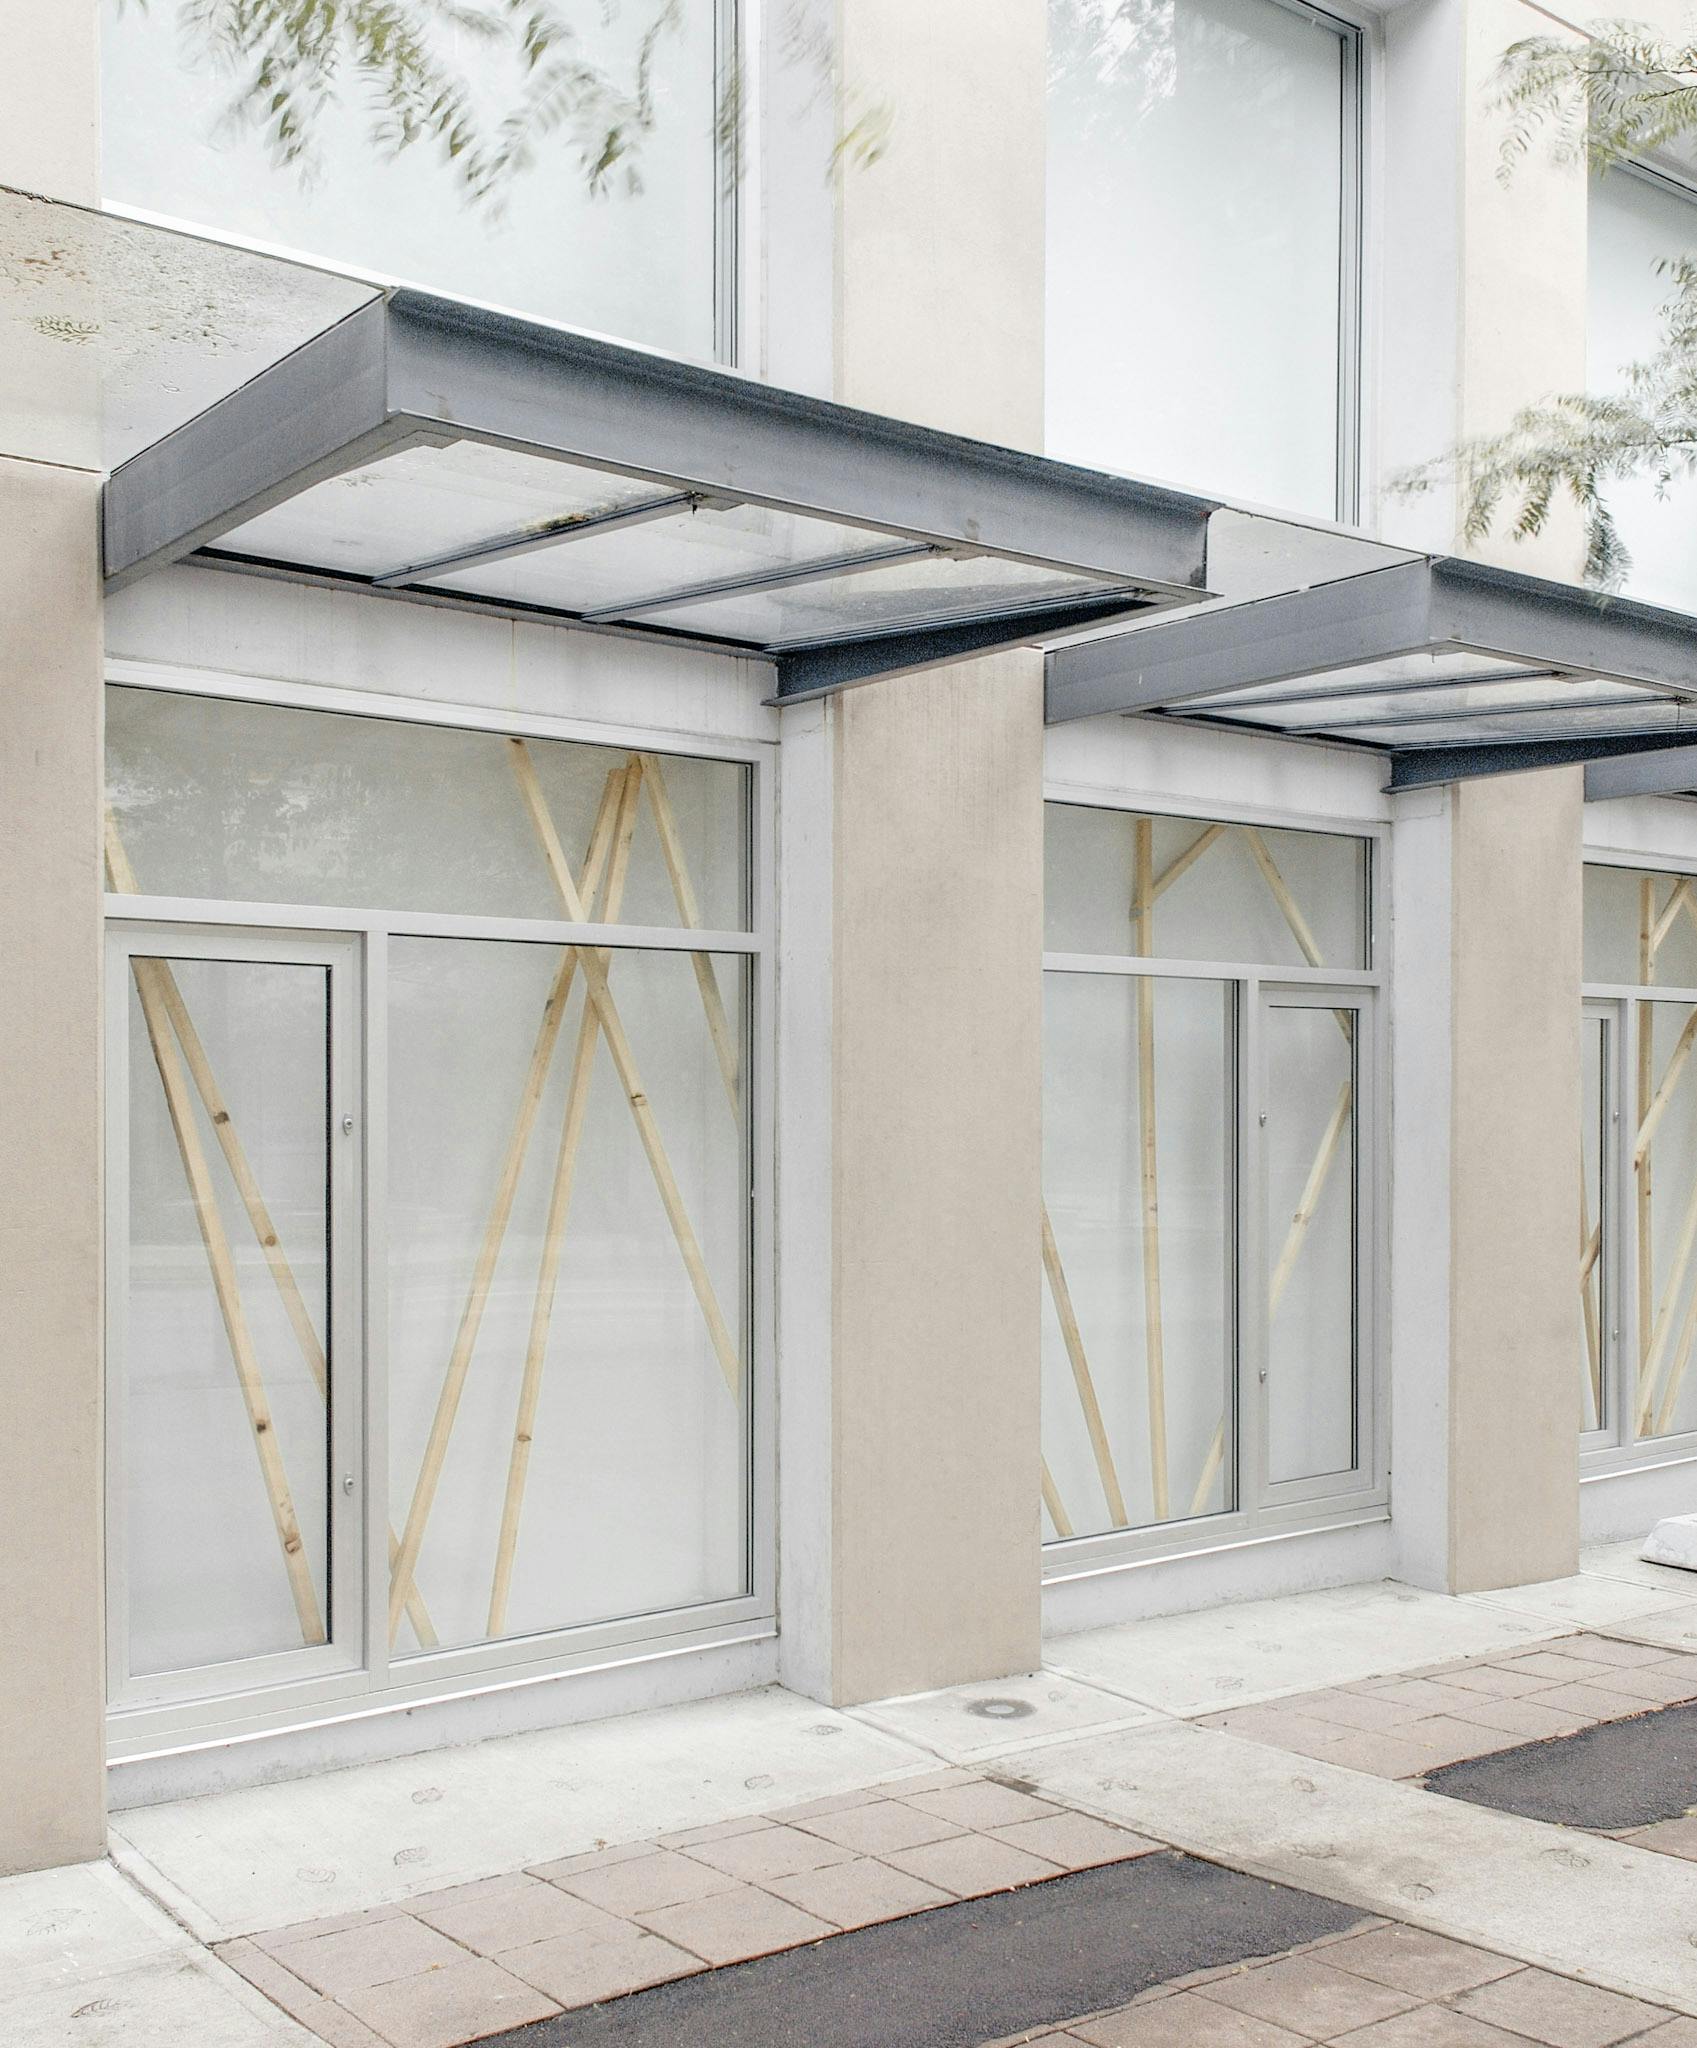 This image shows three of CAG’s window spaces, in which Elspeth Pratt’s installation art is displayed. Unpained thin wooden bars are diagonally installed in those window spaces.